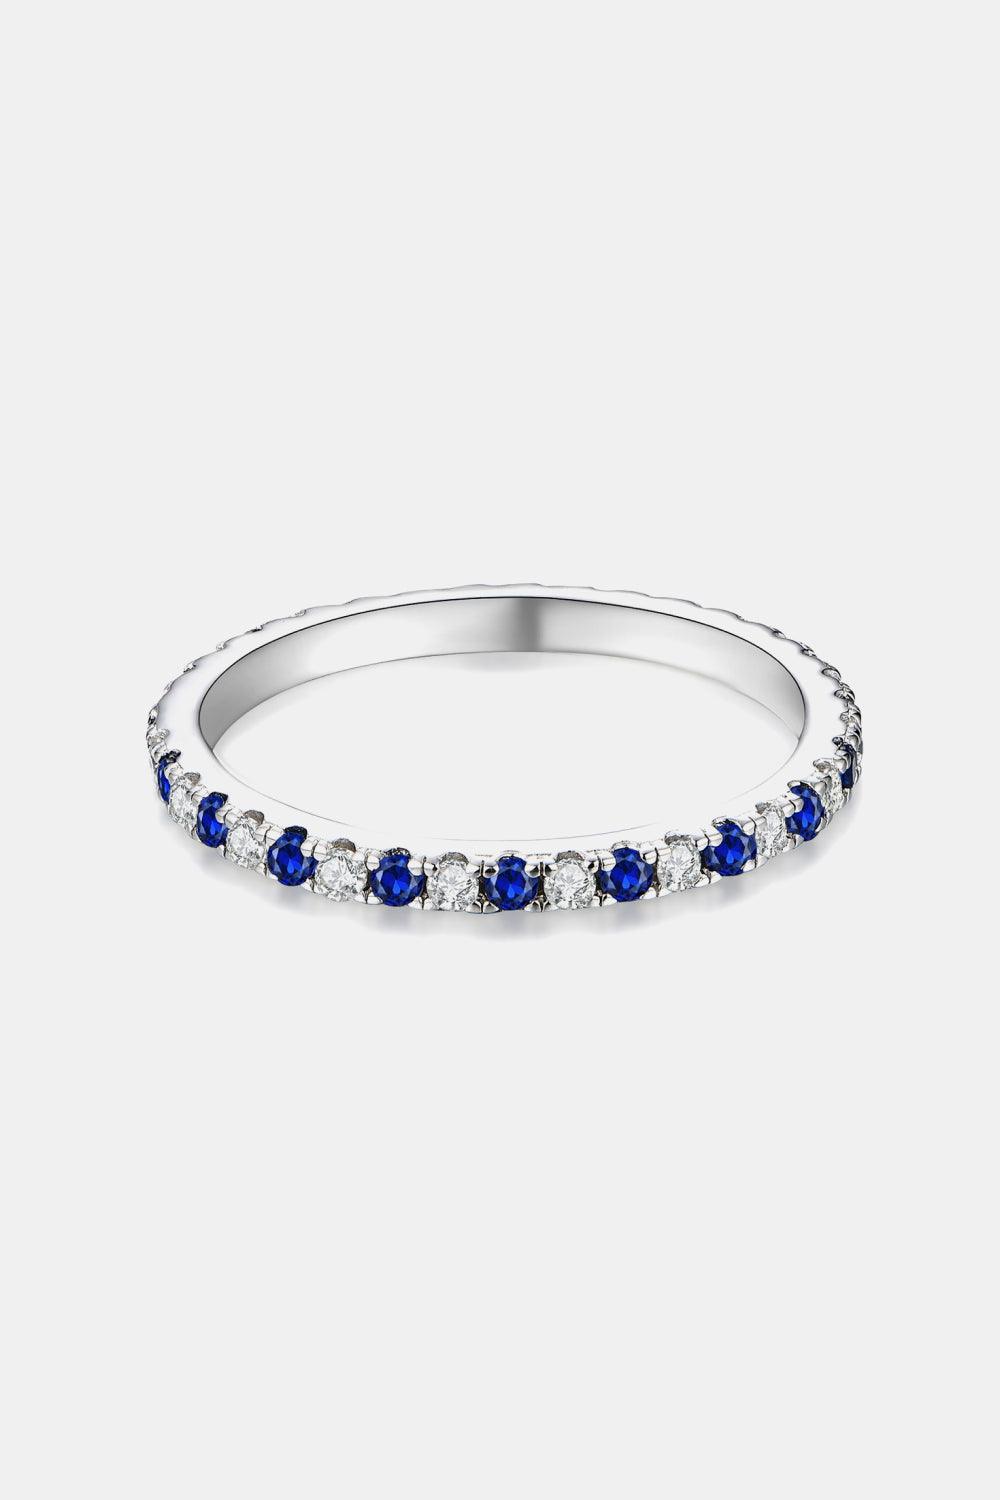 Moissanite Lab-Grown Sapphire Rings - Crazy Like a Daisy Boutique #